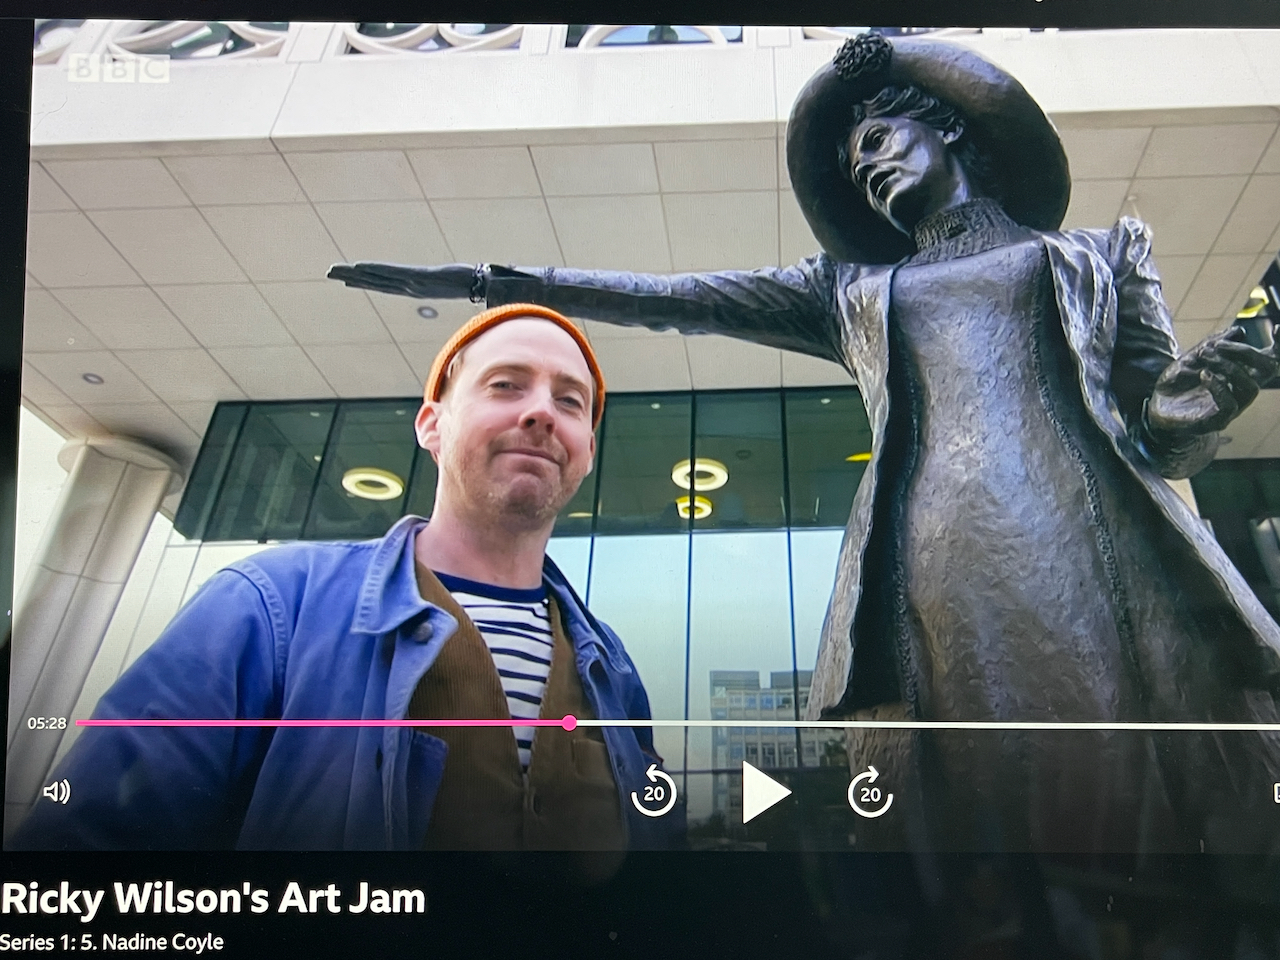 Ricky Wilson smiles under the Our Emmeline statue in Manchester